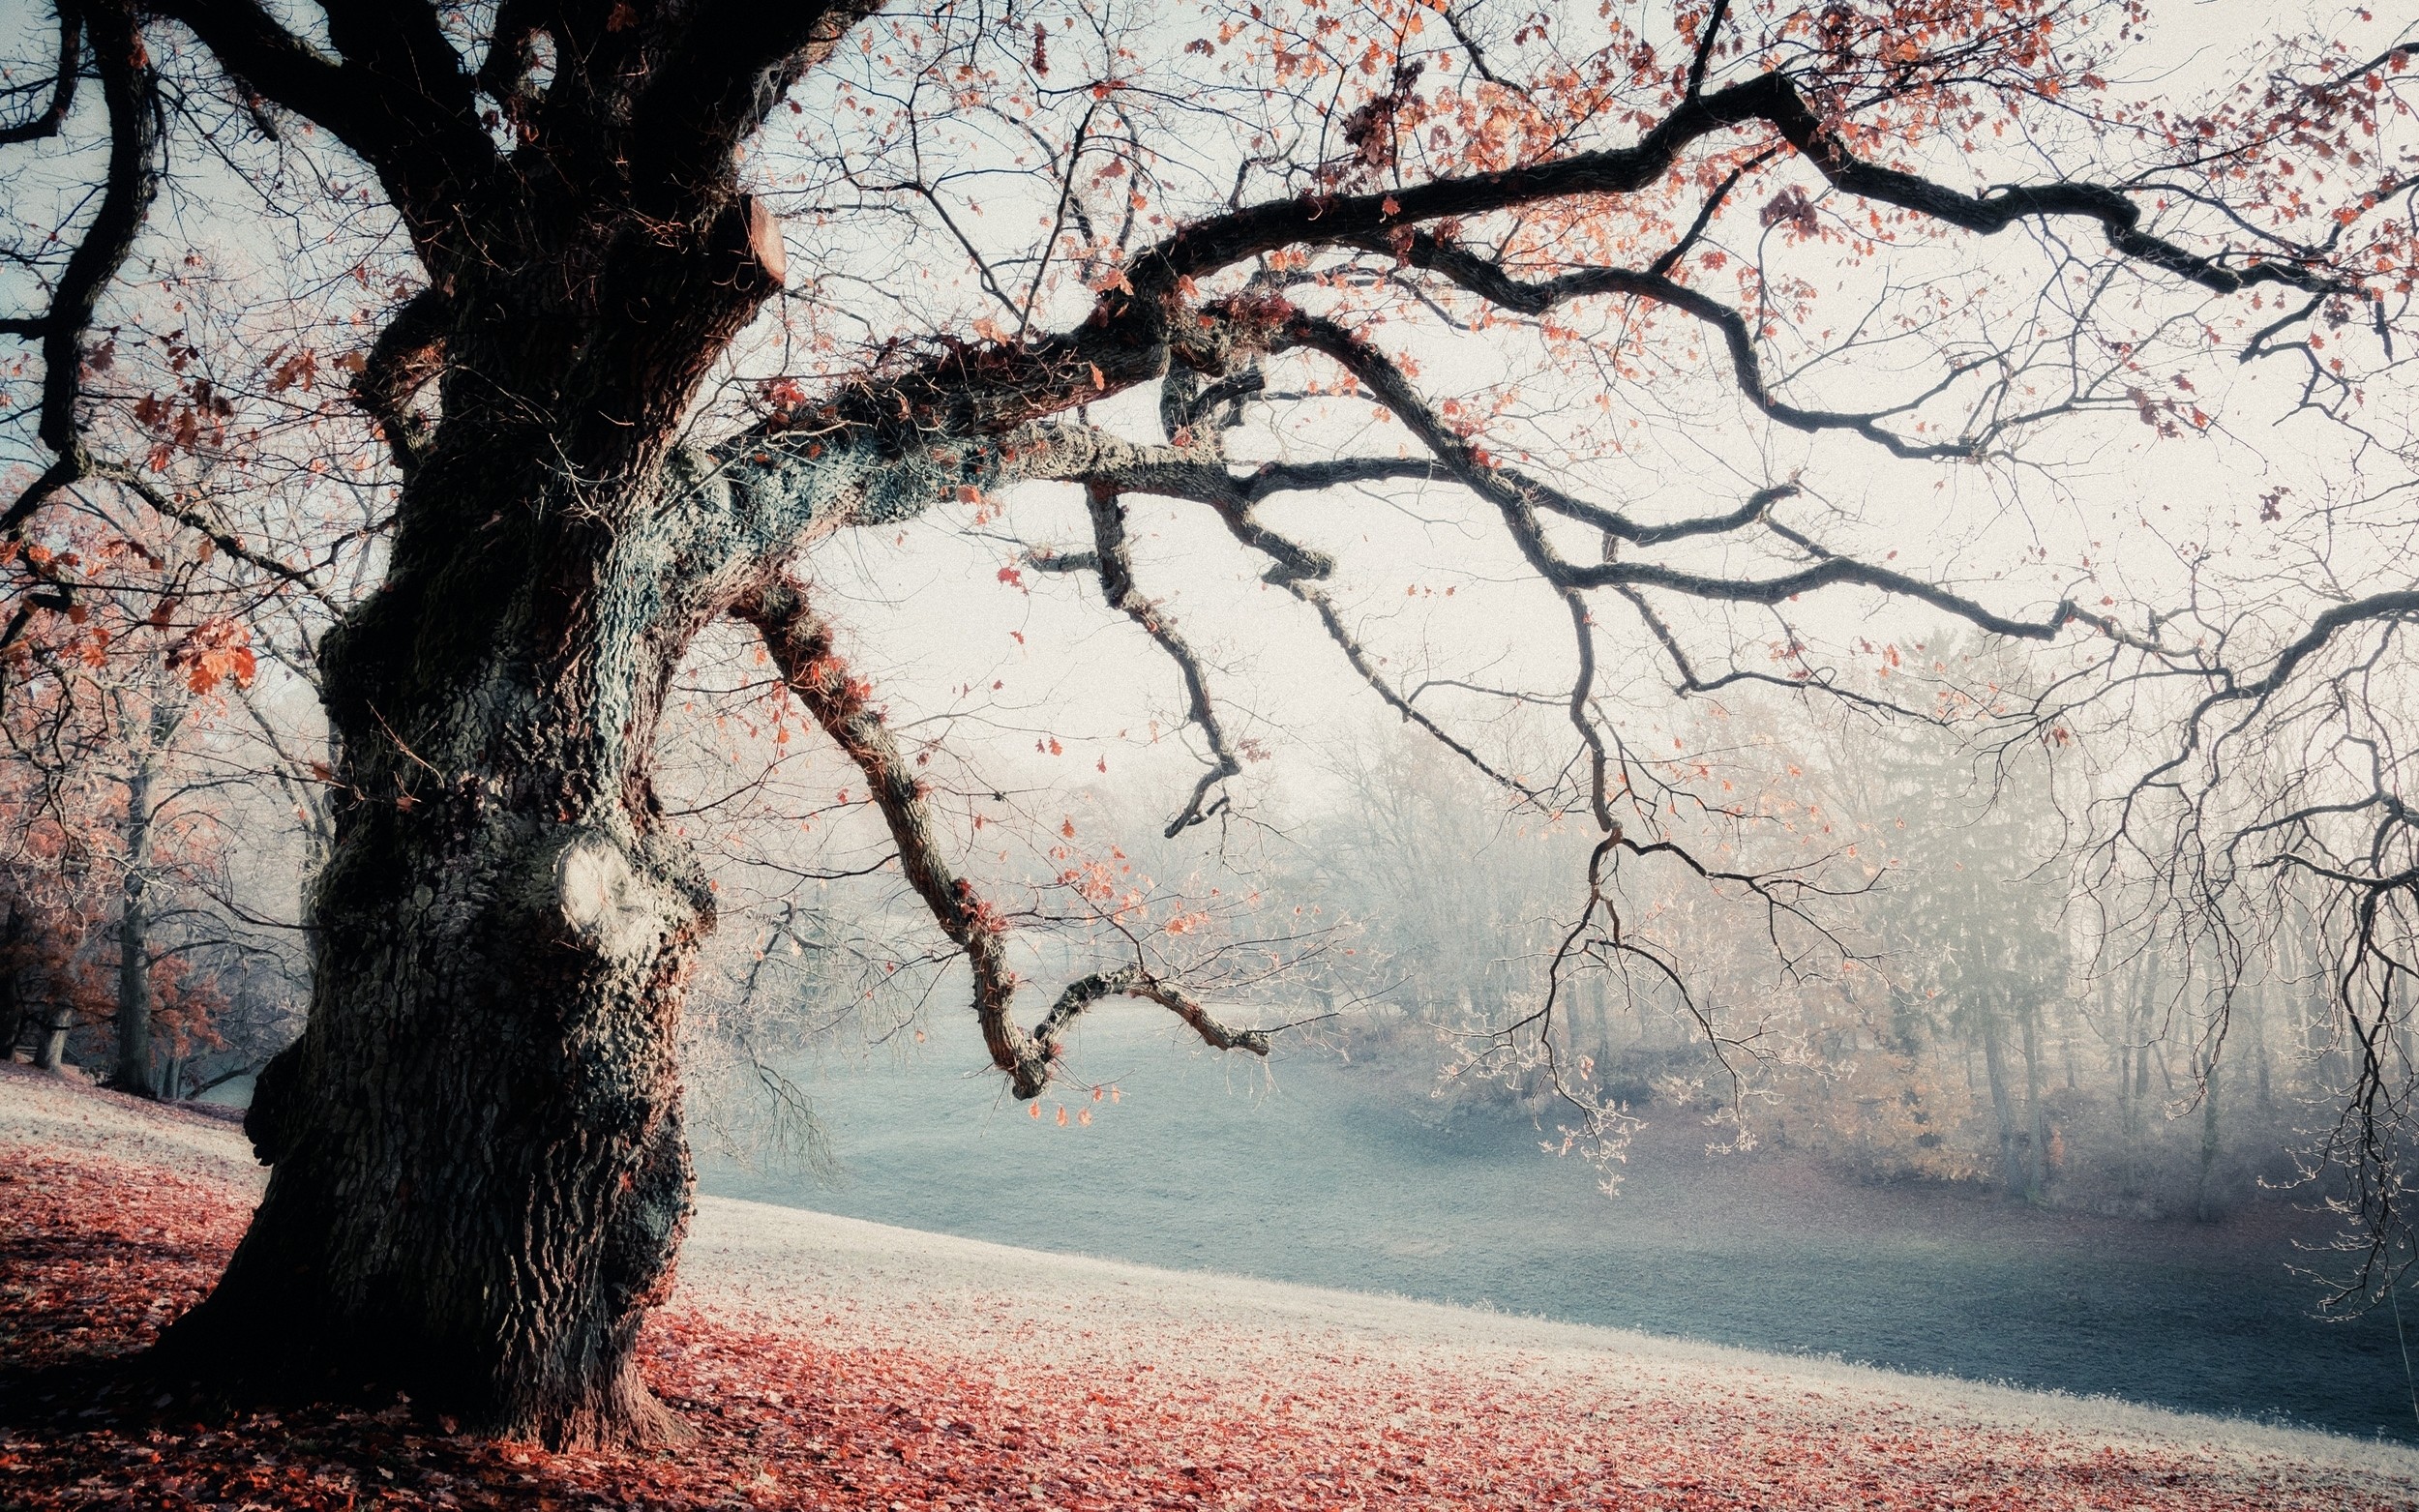 #trees, #park, #nature, #frost, #leaves, #mist